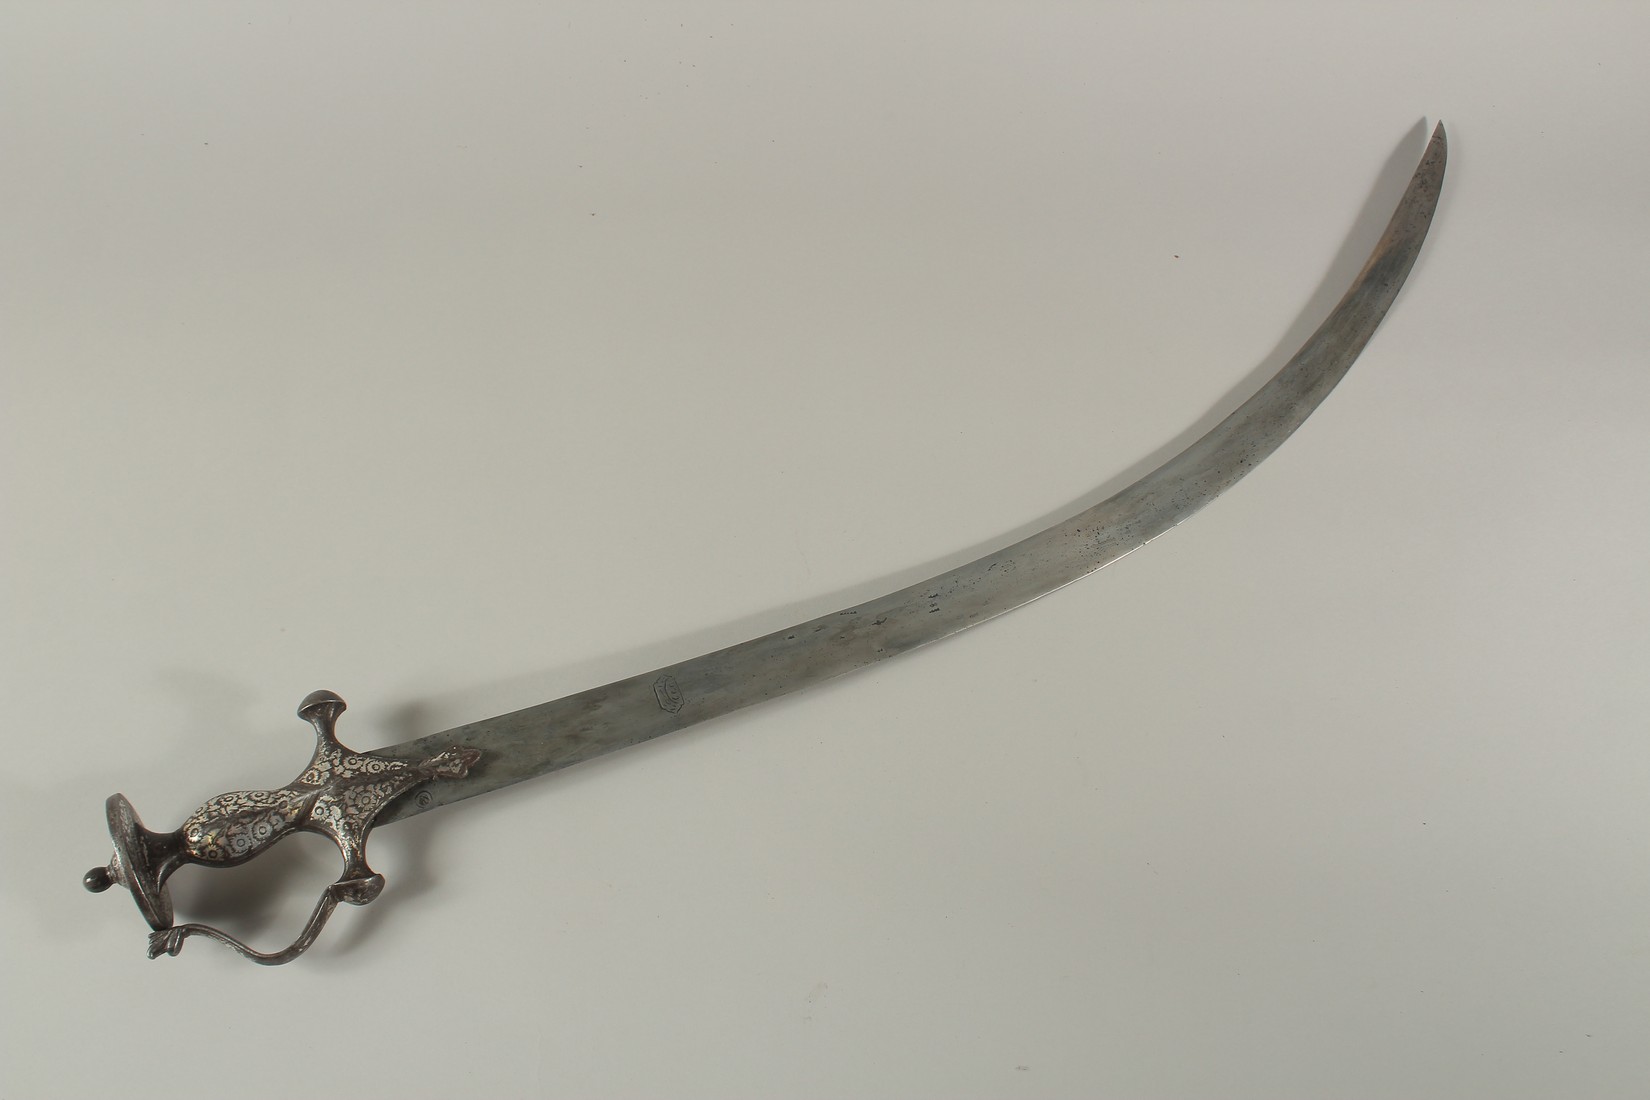 AN 18TH CENTURY MUGHAL INDIAN TULWAR SWORD, with silver inlaid hilt and signed blade.